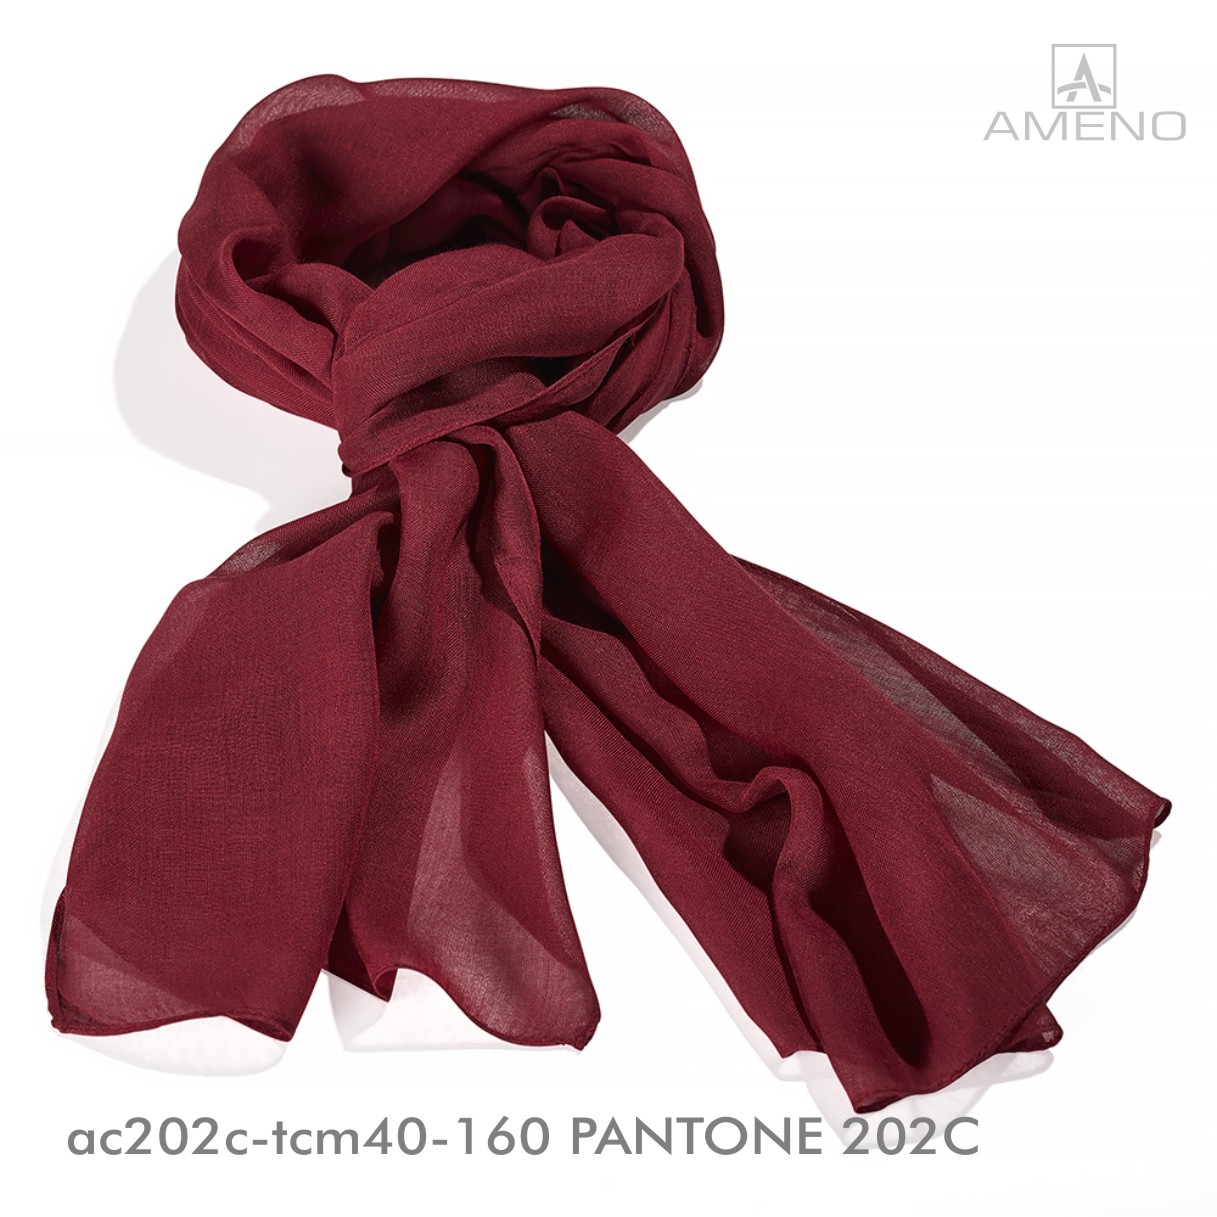 Bordeaux Burgundy Scarf In Solid Color Always Is In Stock In Many Sizesadverties